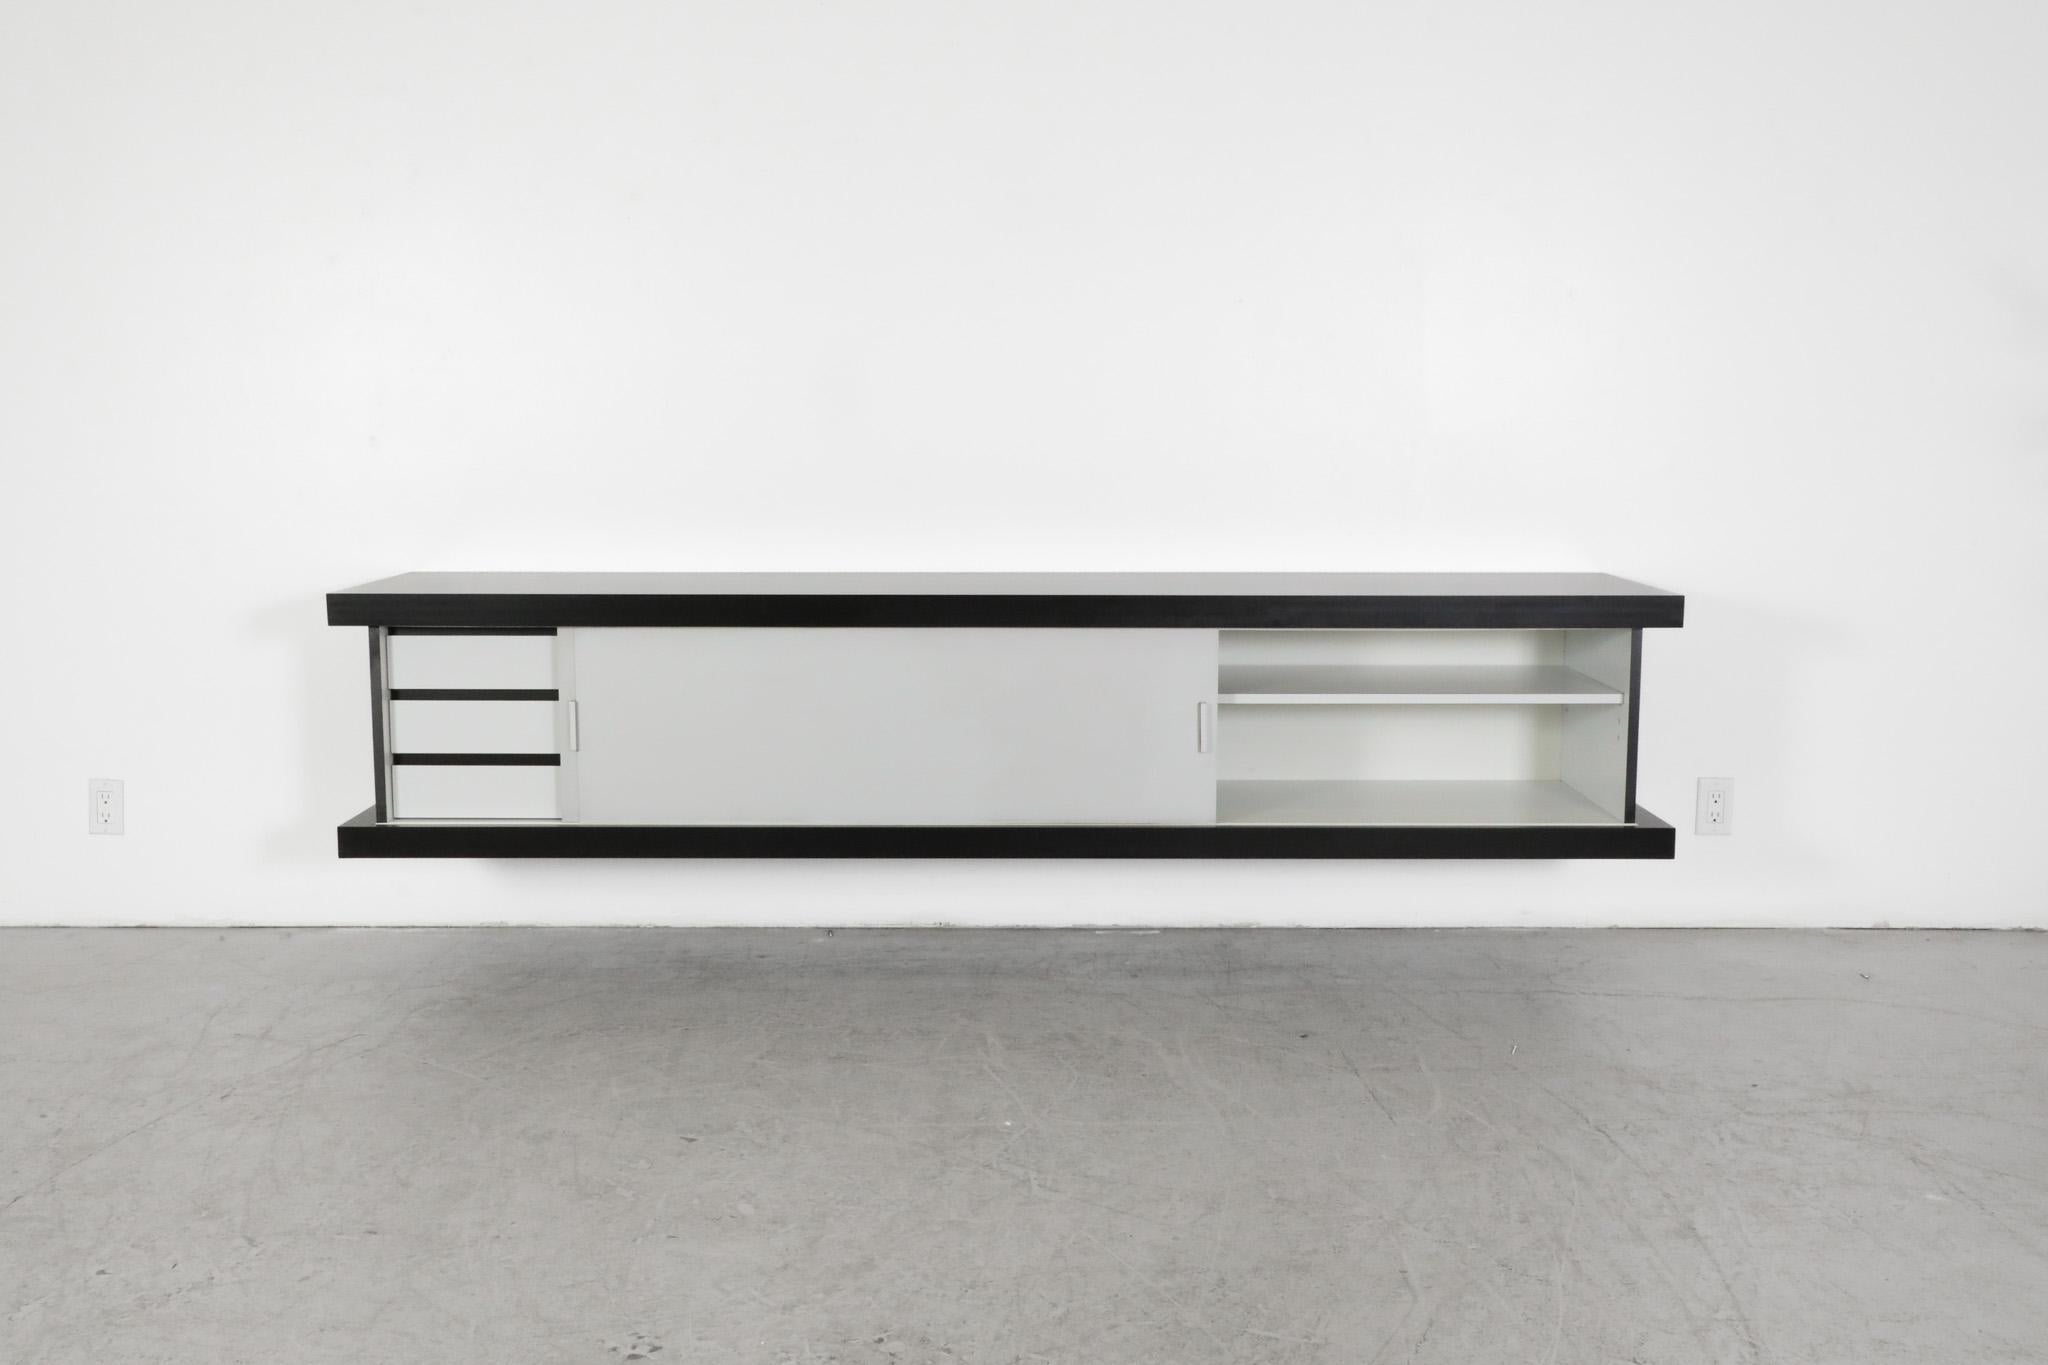 Mid-Century, floating wall mount credenza designed by Wim Wilson for Castelijn, 1964. Castelijn Meubelindustrie was founded in 1958 by Gerard Castelijn. Under his inspiring leadership, the company grew into a leading player on the furniture scene.